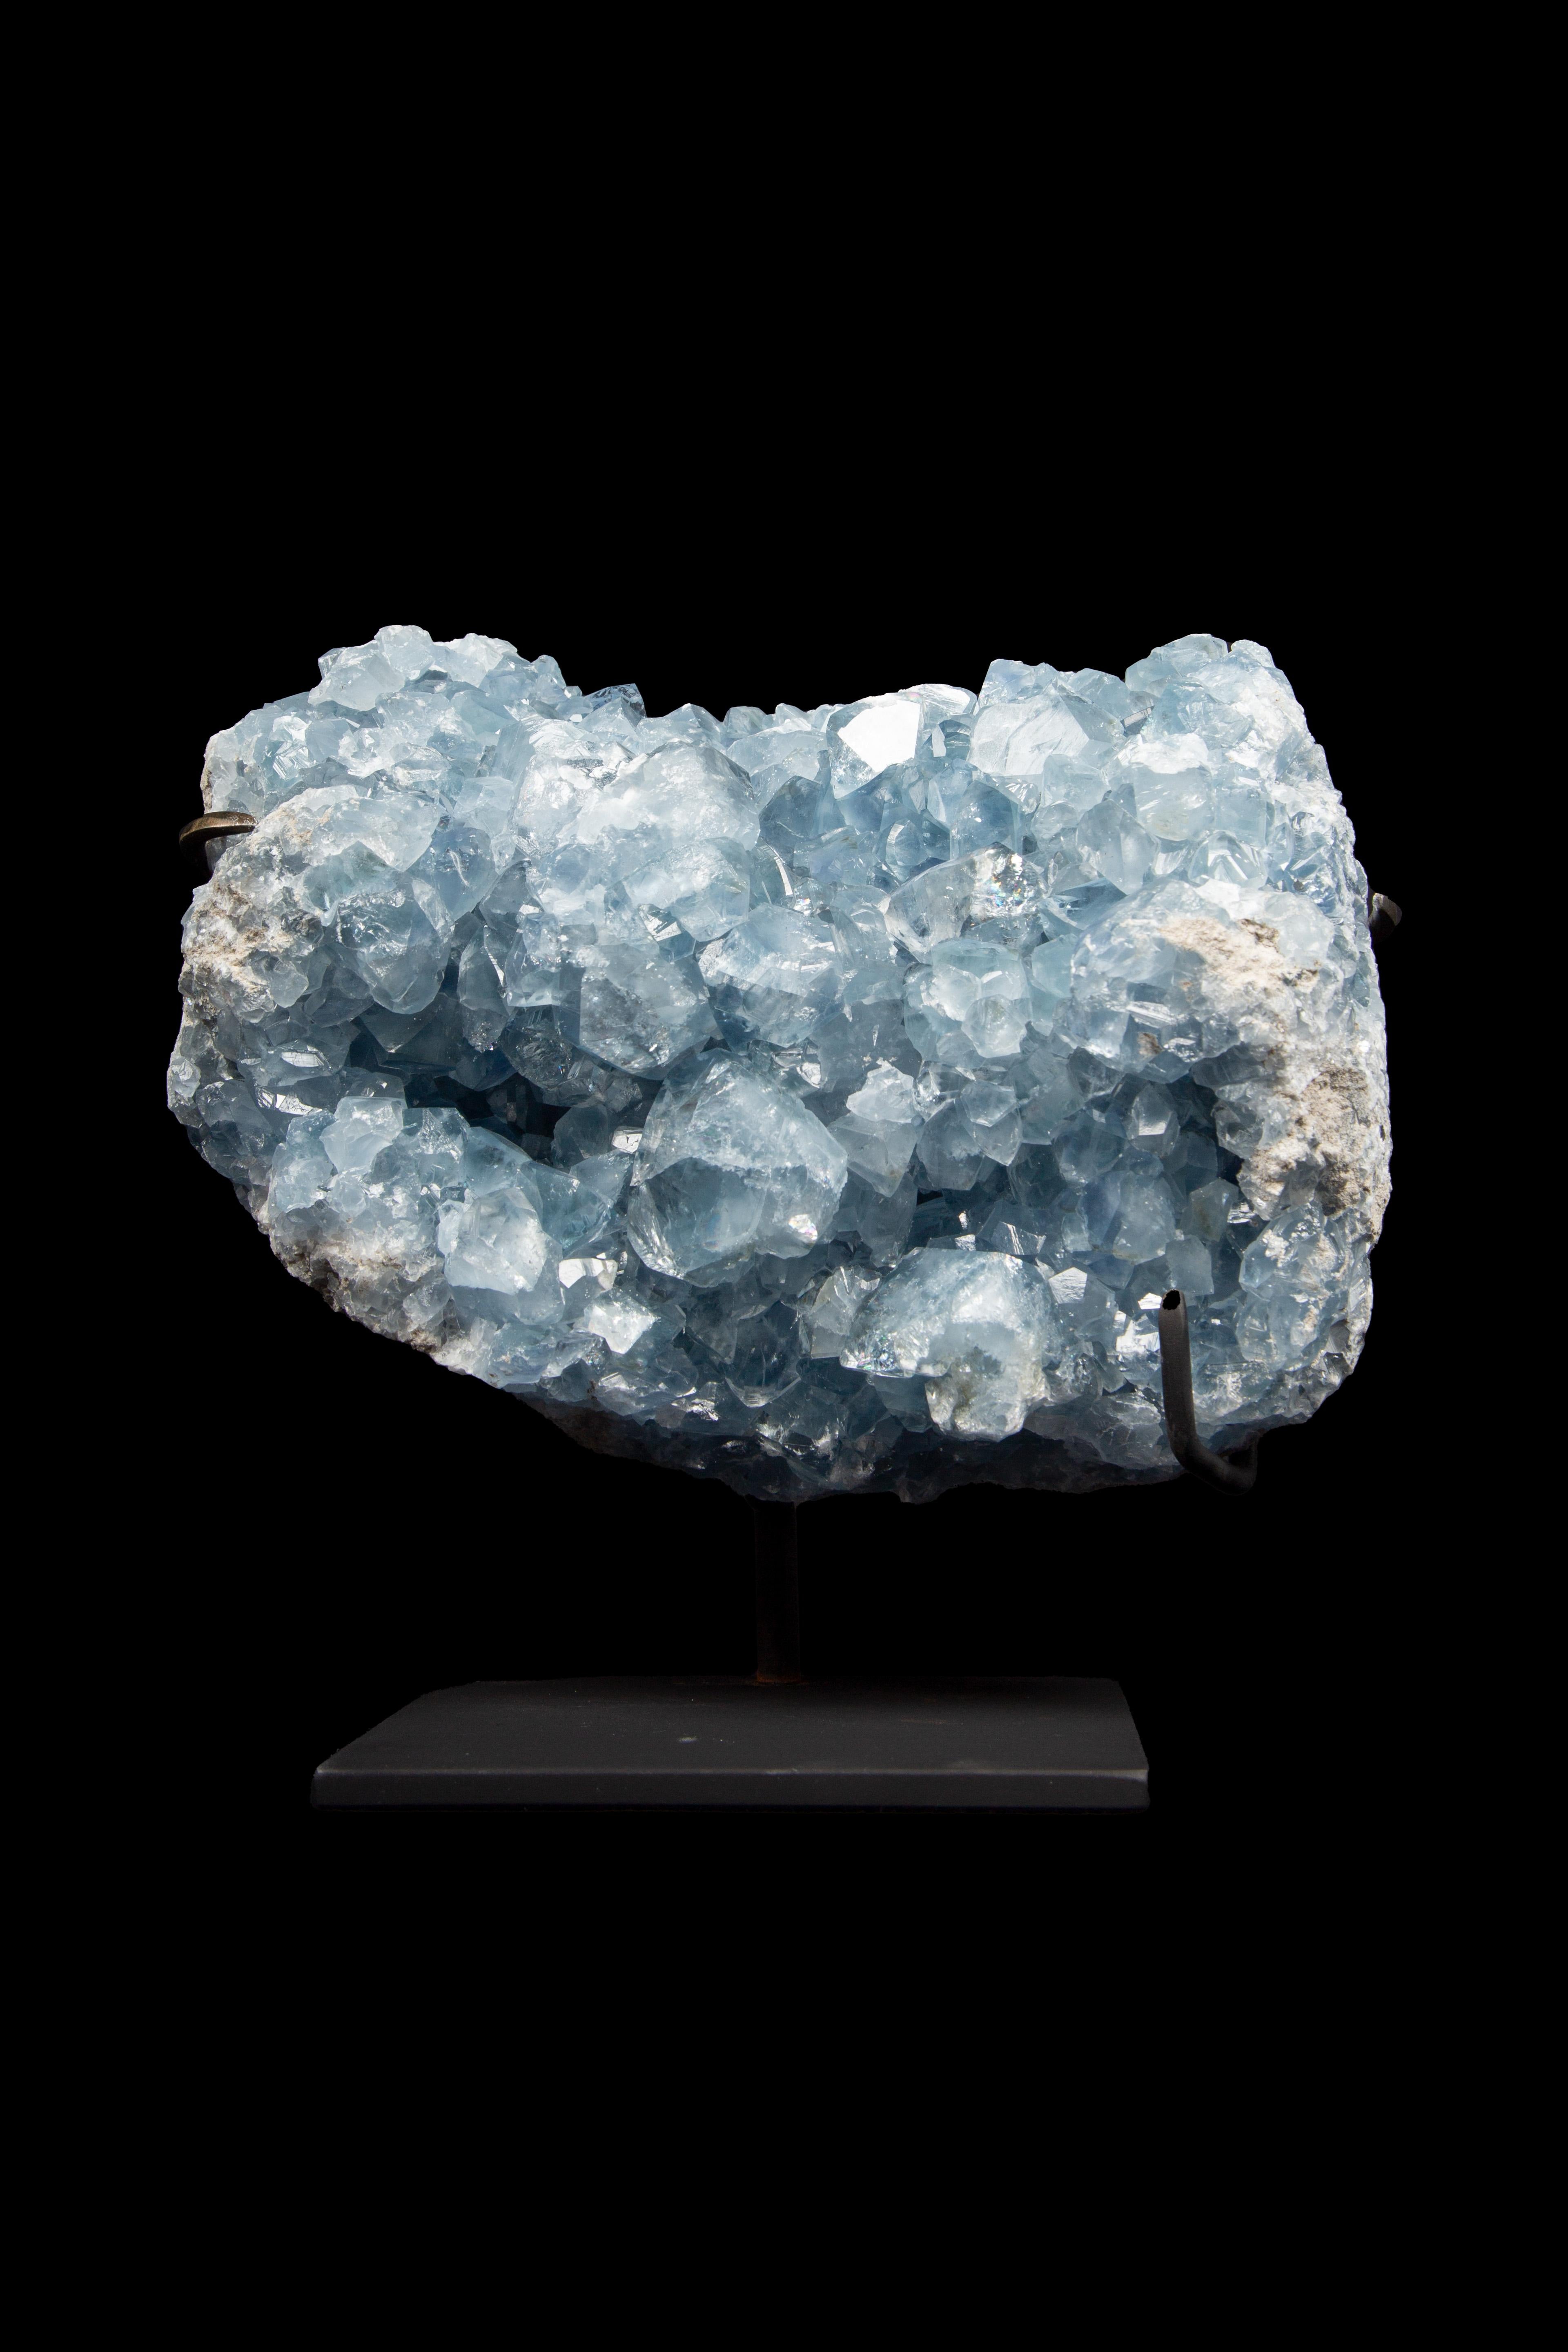  Blue Calcite specimen elegantly showcased on a meticulously crafted custom-painted metal stand. While Calcites are distributed across every continent, the exquisite Blue Calcite is a rarity, gracing only a select few locations on our planet. Though